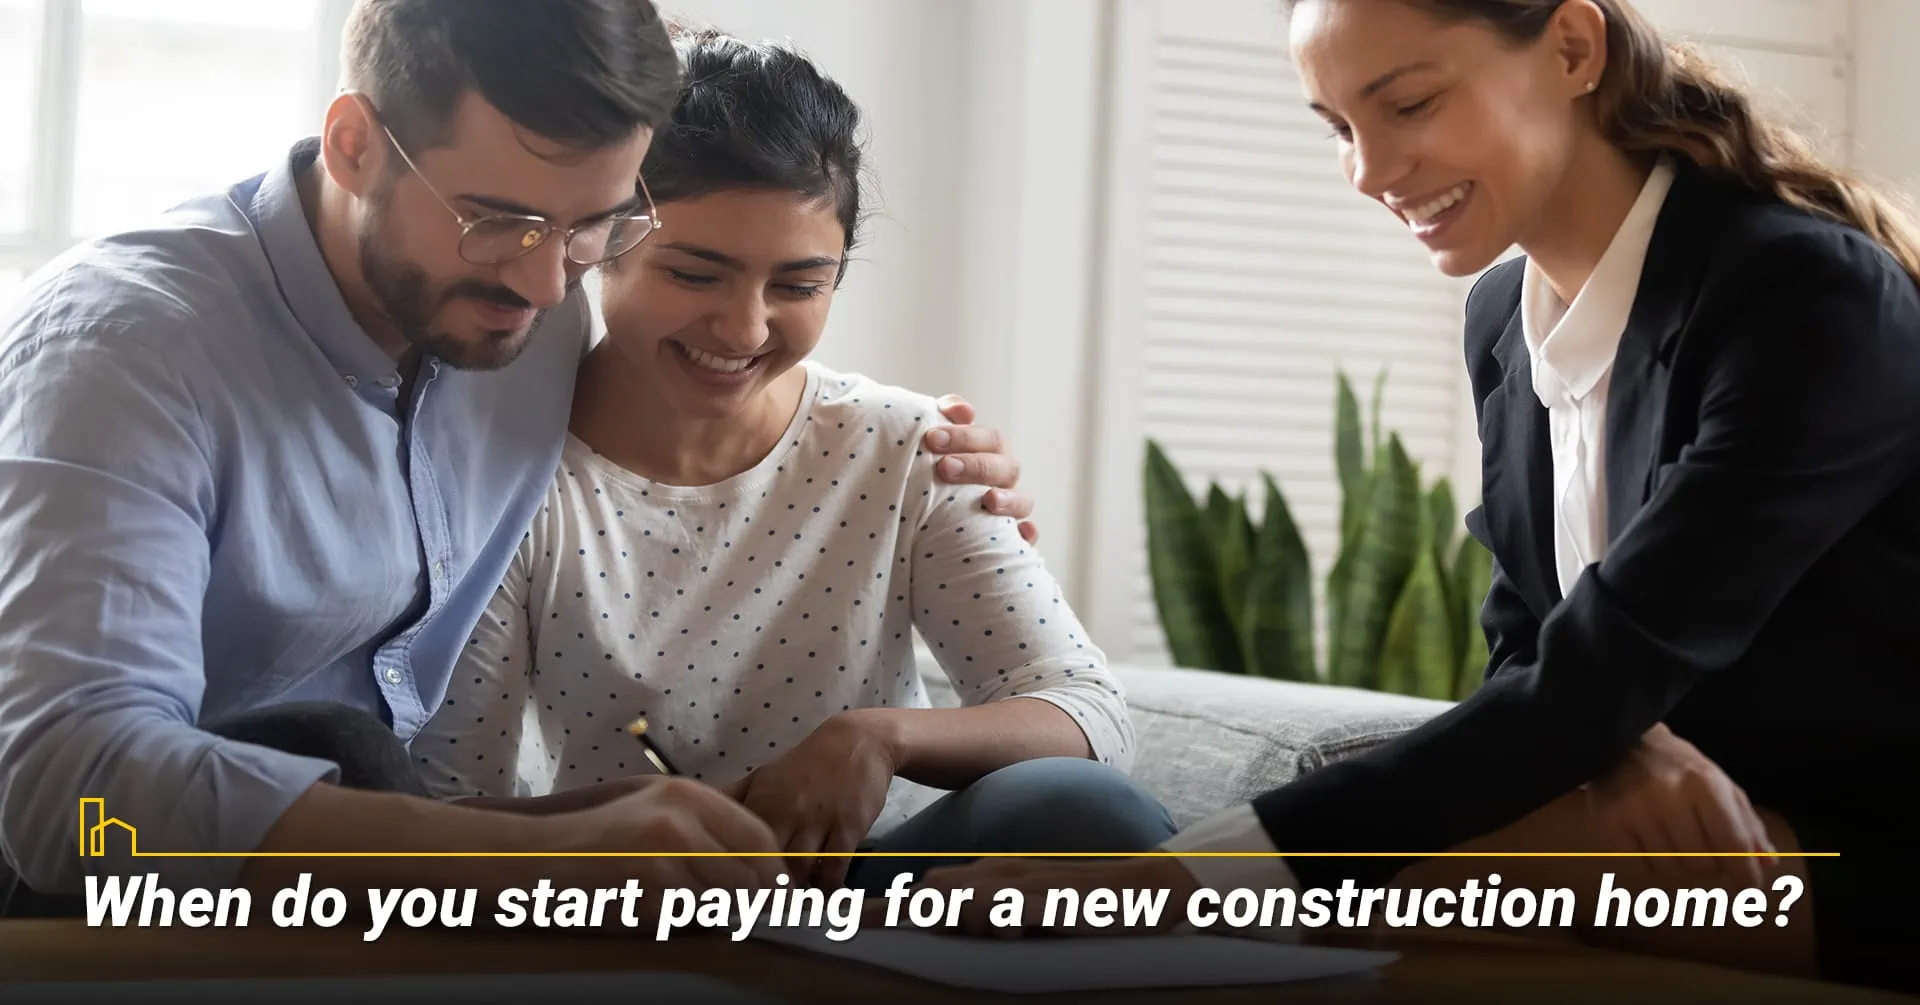 When do you start paying for a new construction home?